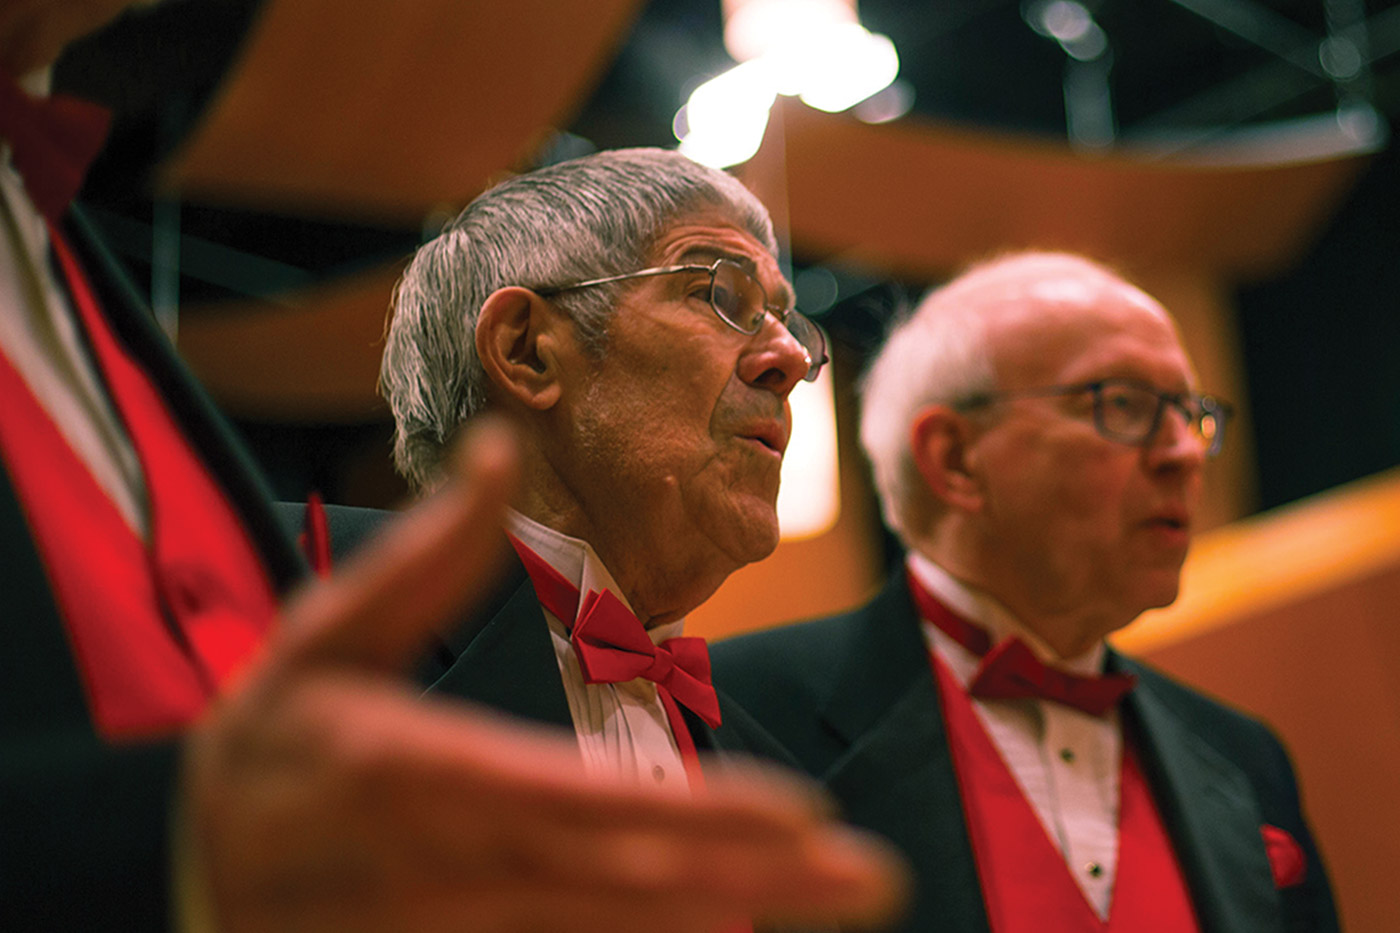 Three older adults wearing red bow ties and singing